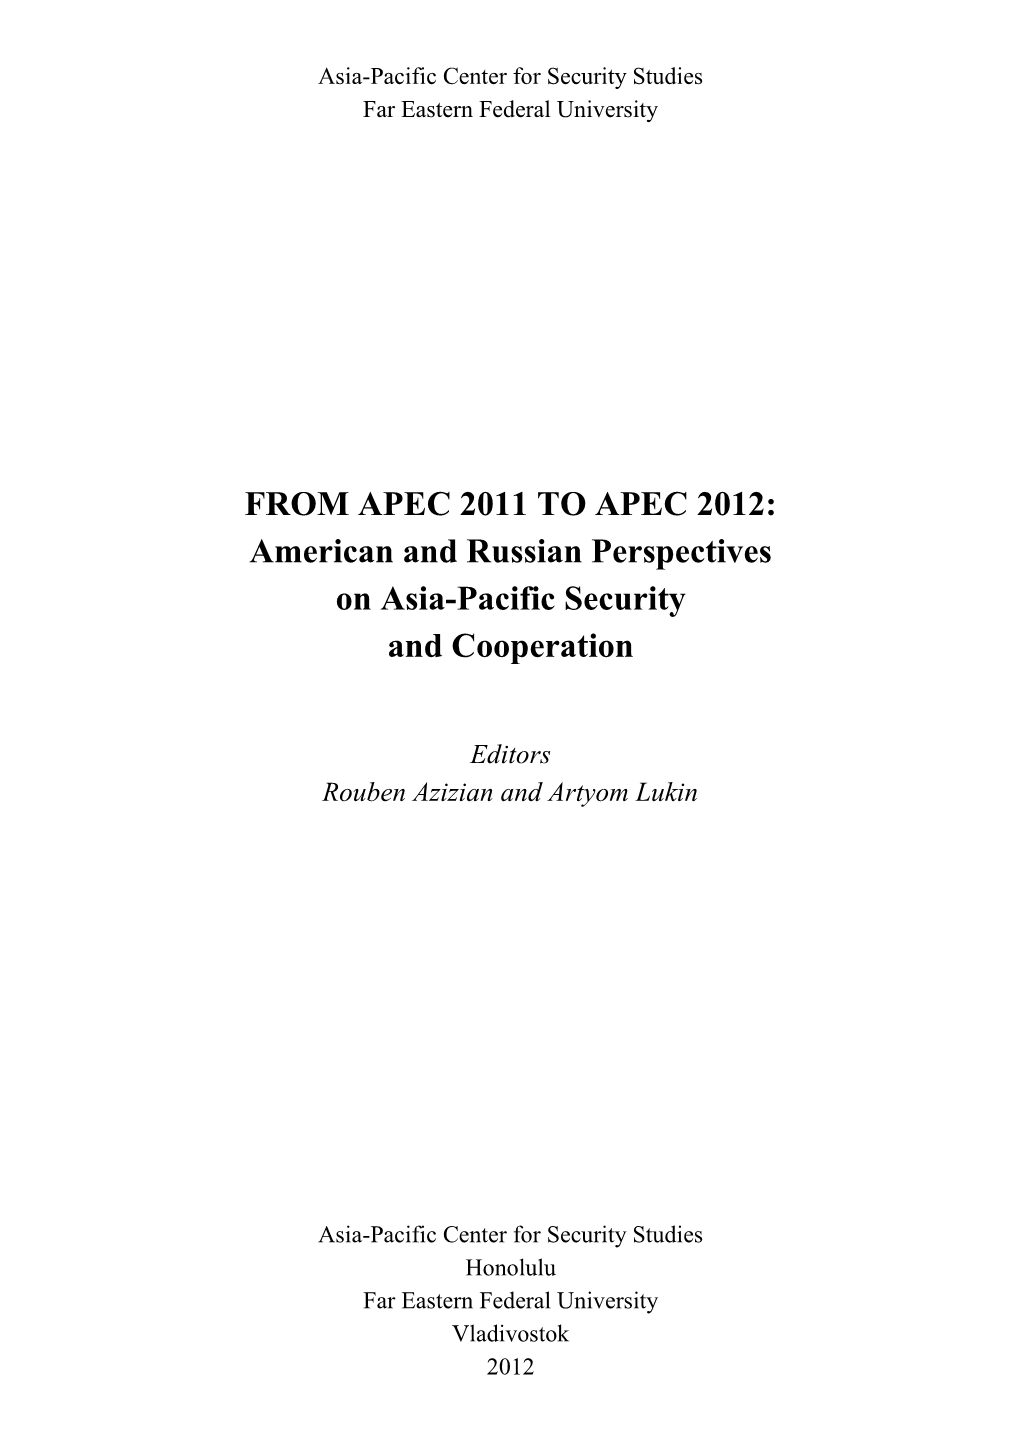 FROM APEC 2011 to APEC 2012: American and Russian Perspectives on Asia-Pacific Security and Cooperation